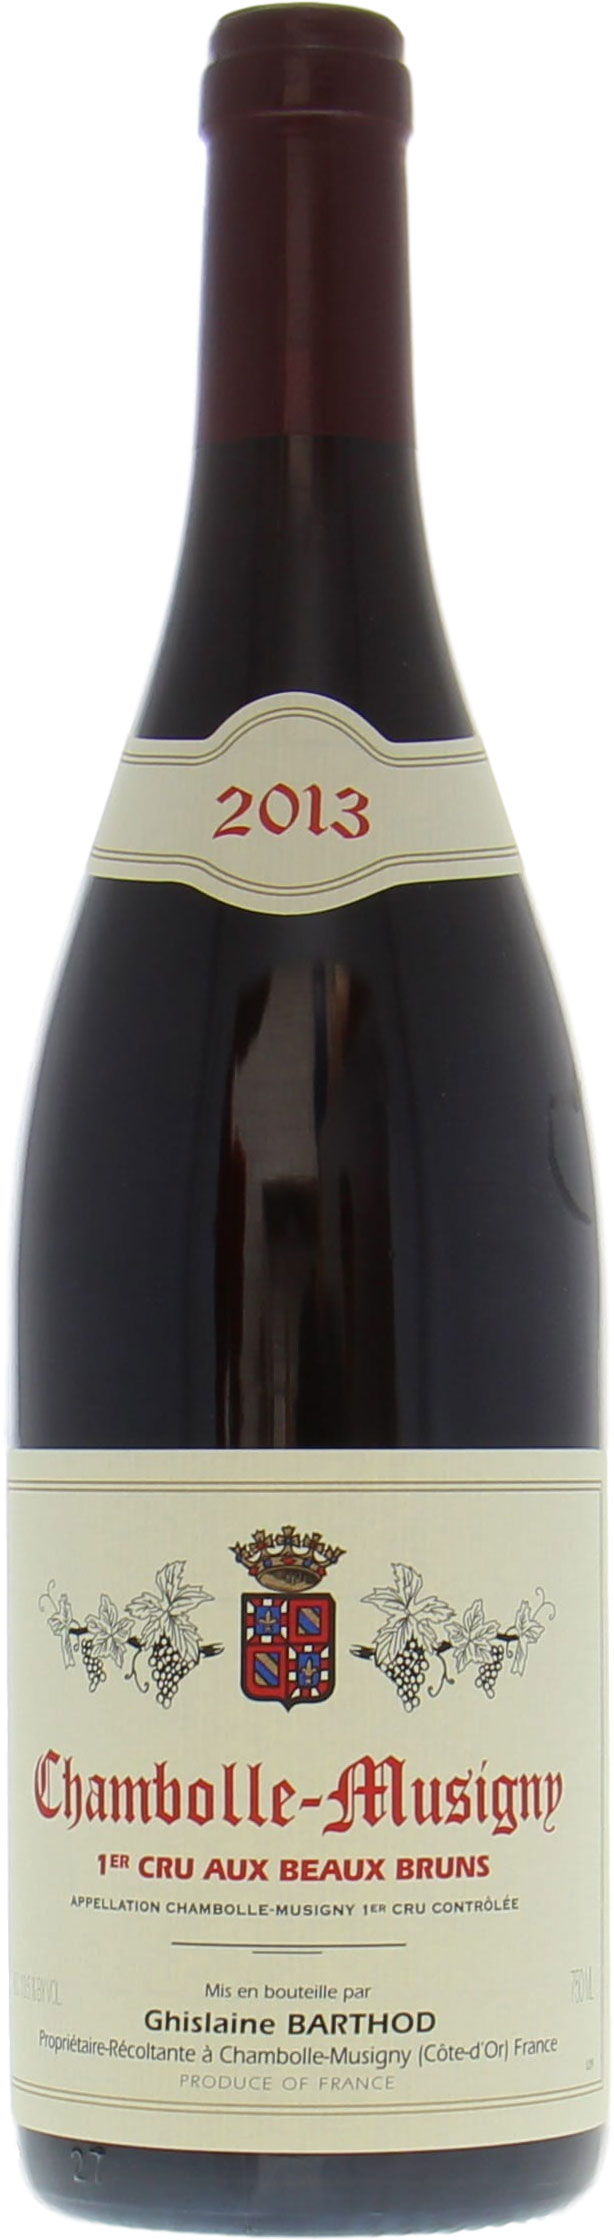 Ghislaine Barthod - Chambolle Musigny Aux Beaux Bruns 2013 Perfect